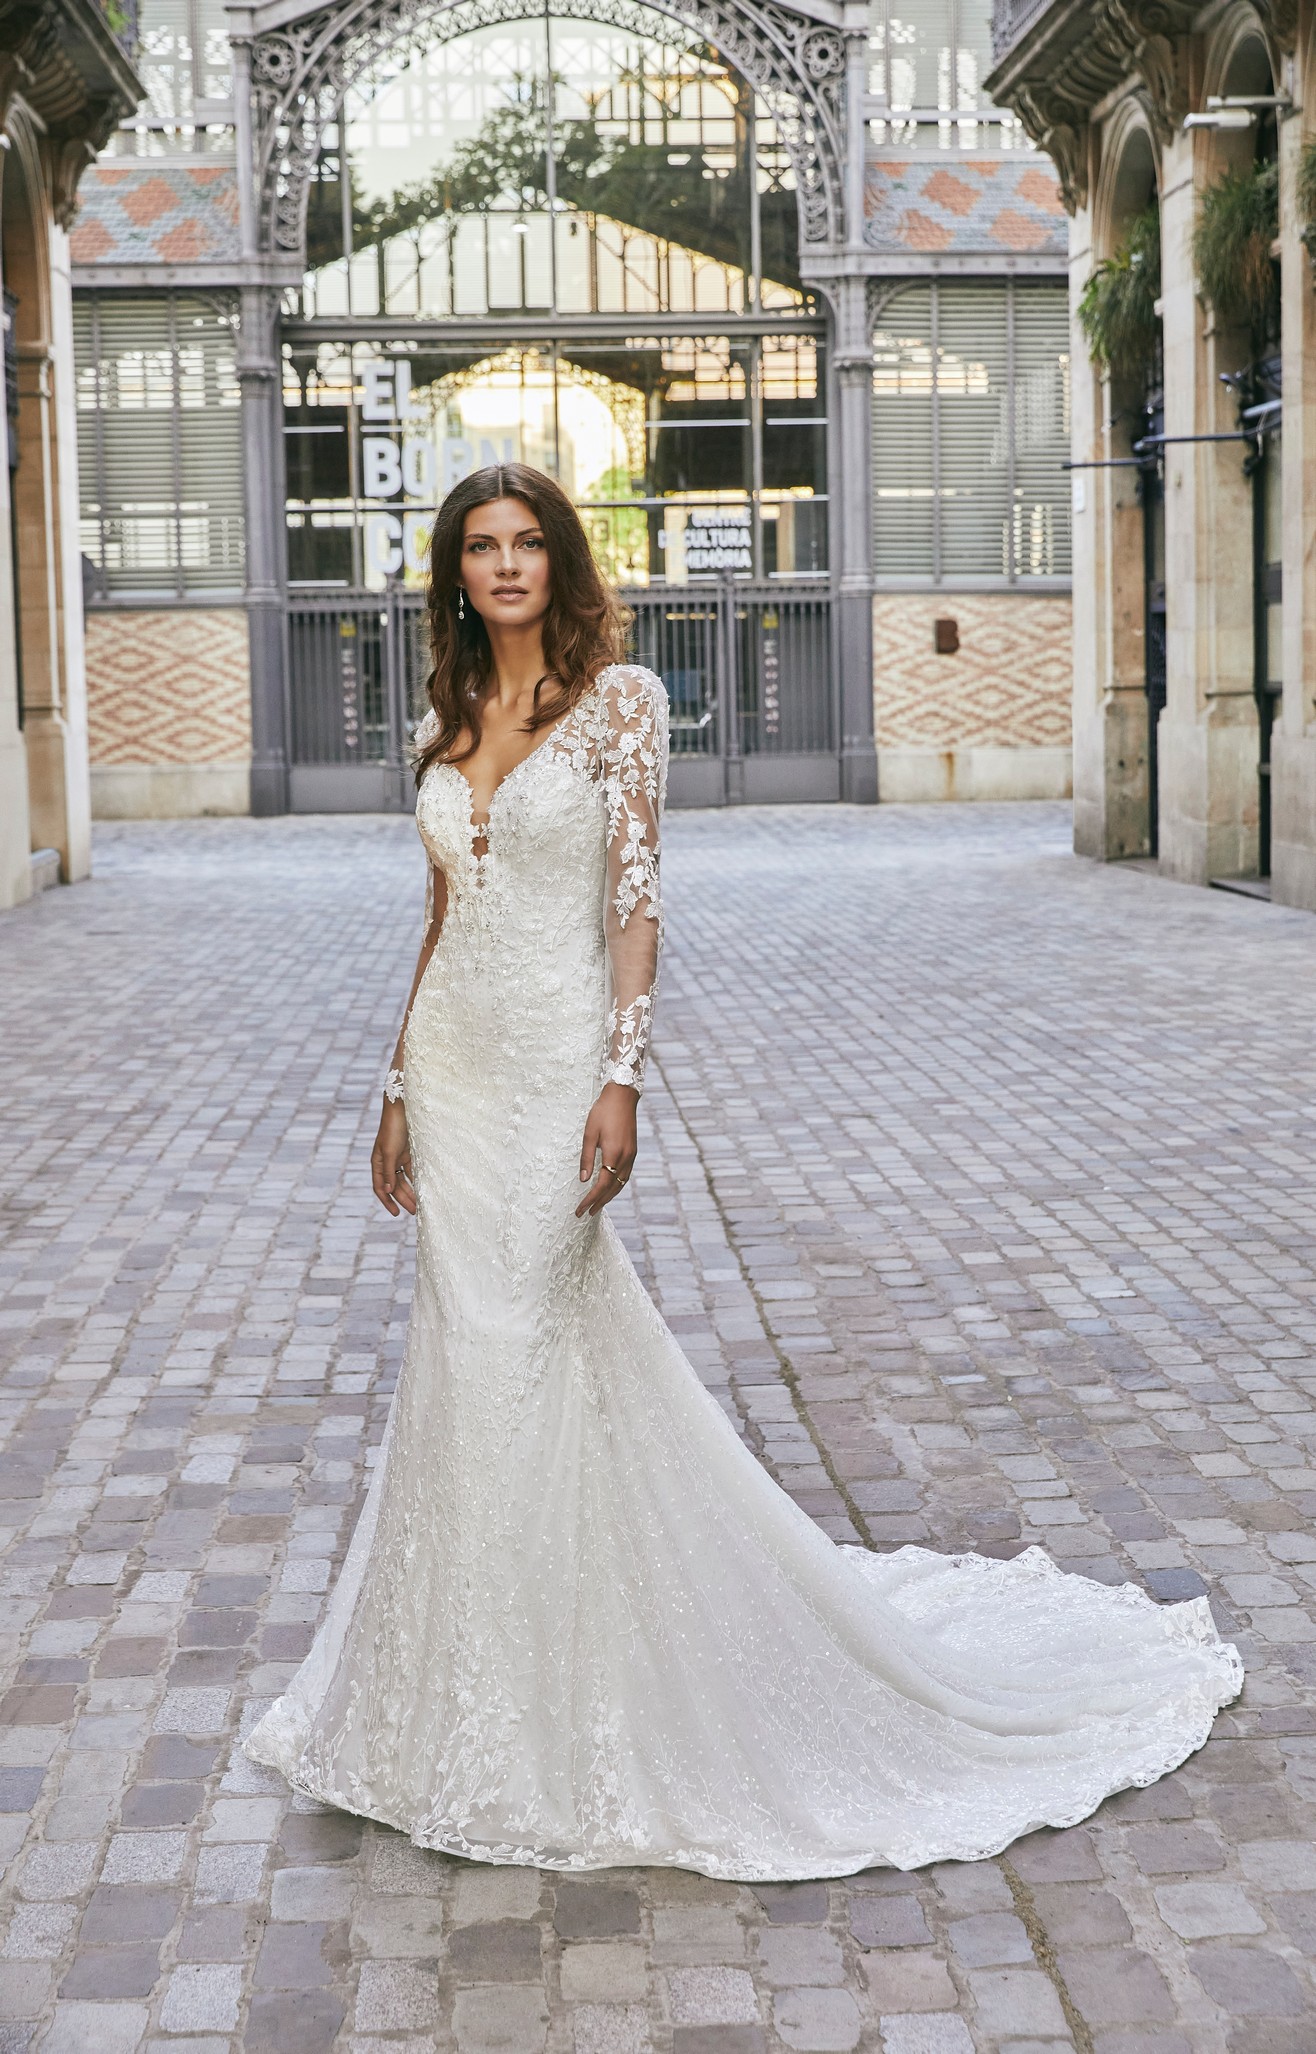 Lady standing in plaza wearing fit and flare wedding dress with illusion long sleeves and sweetheart neckline